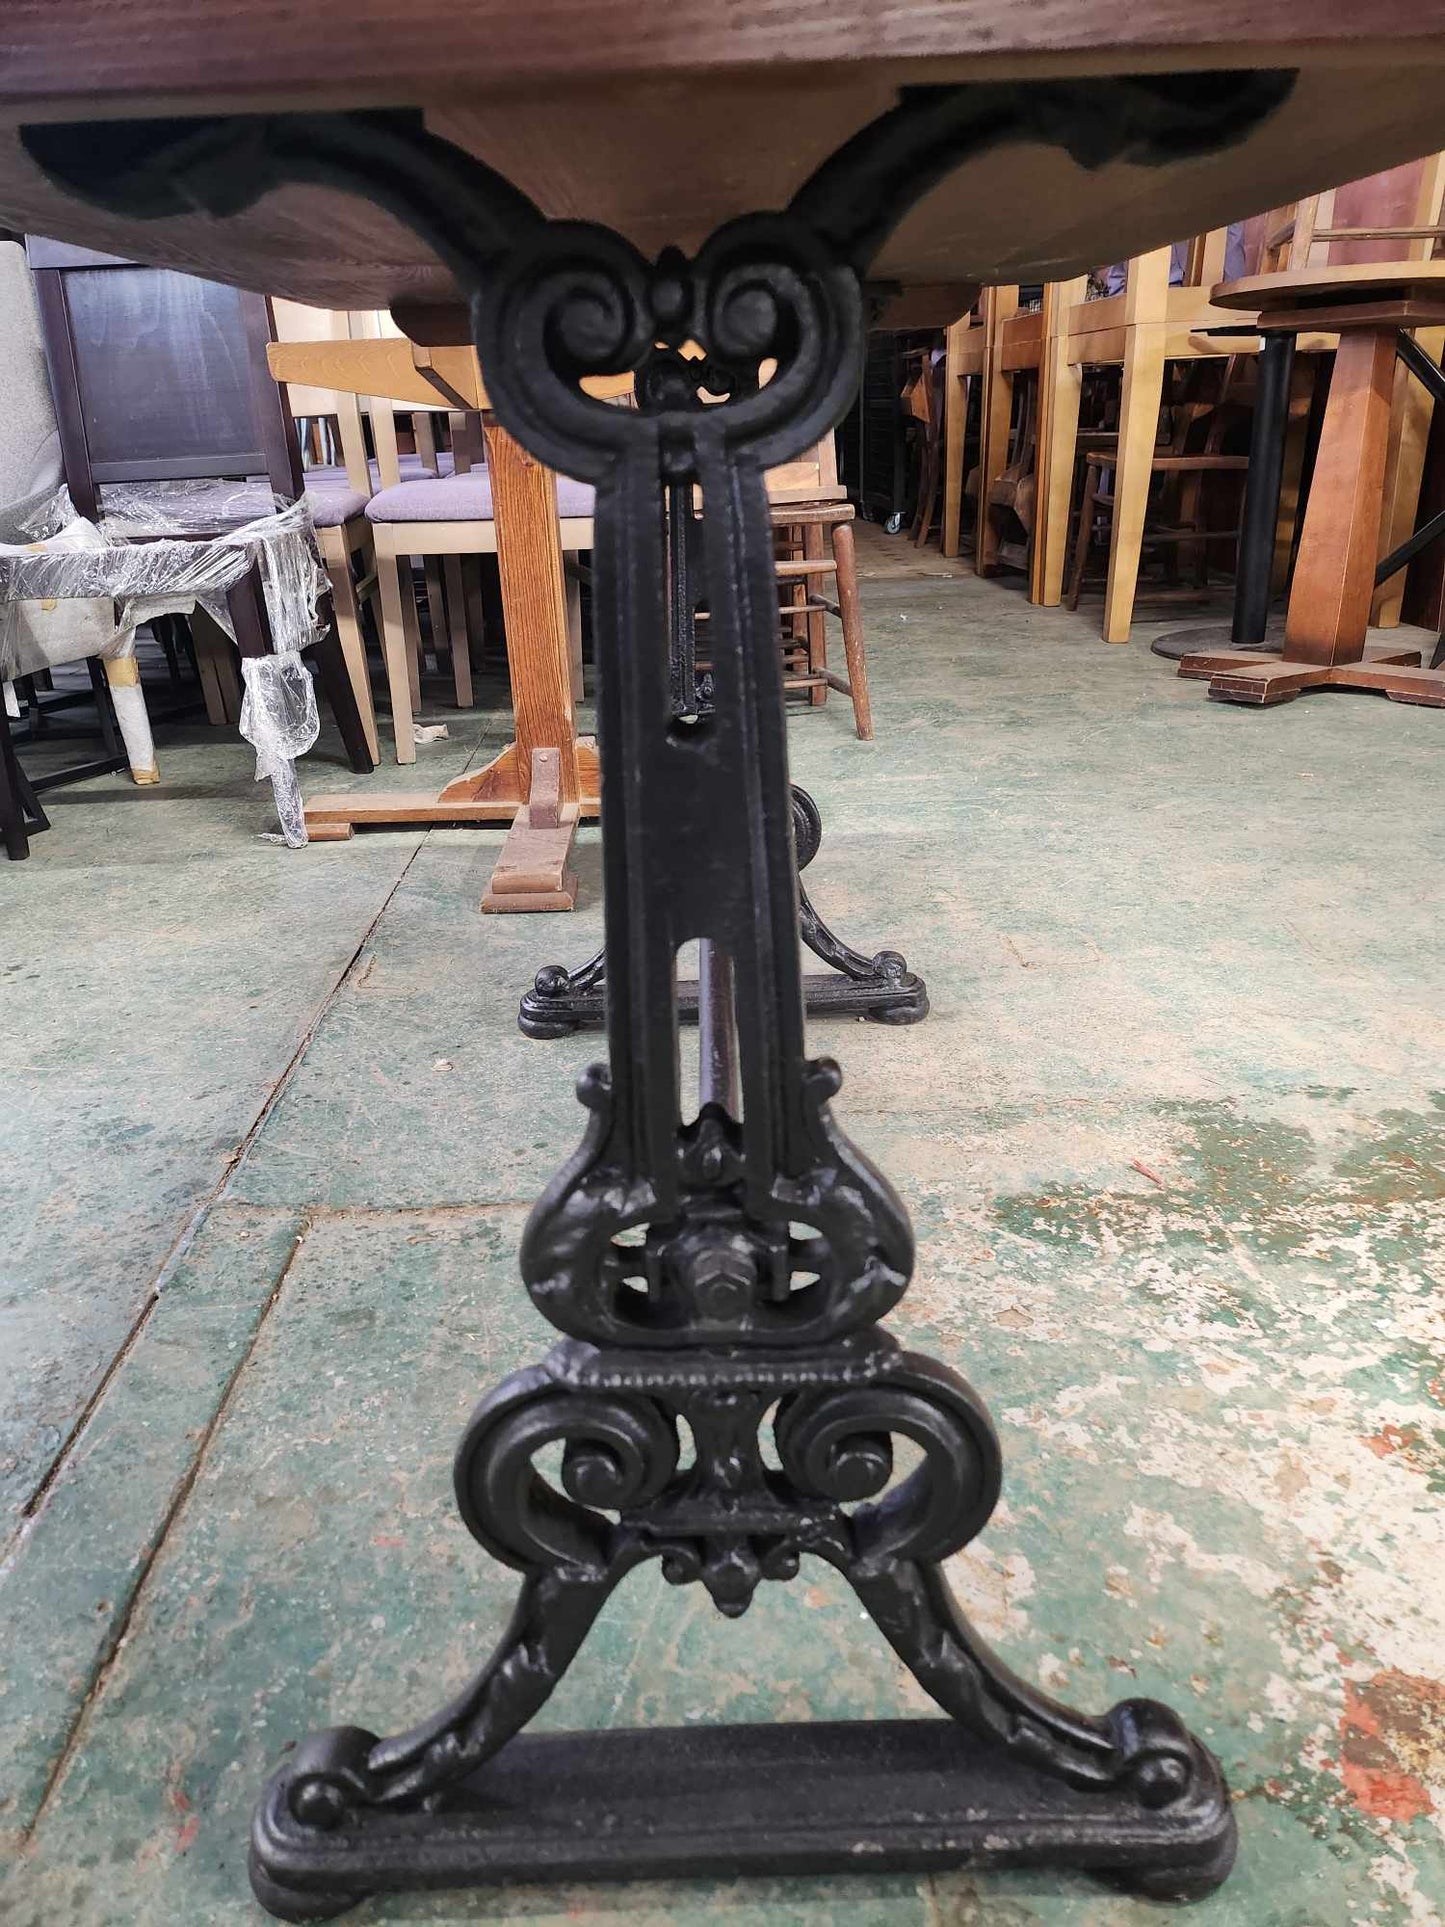 Cast Iron Restaurant Table with Wooden Top and Ornate Legs